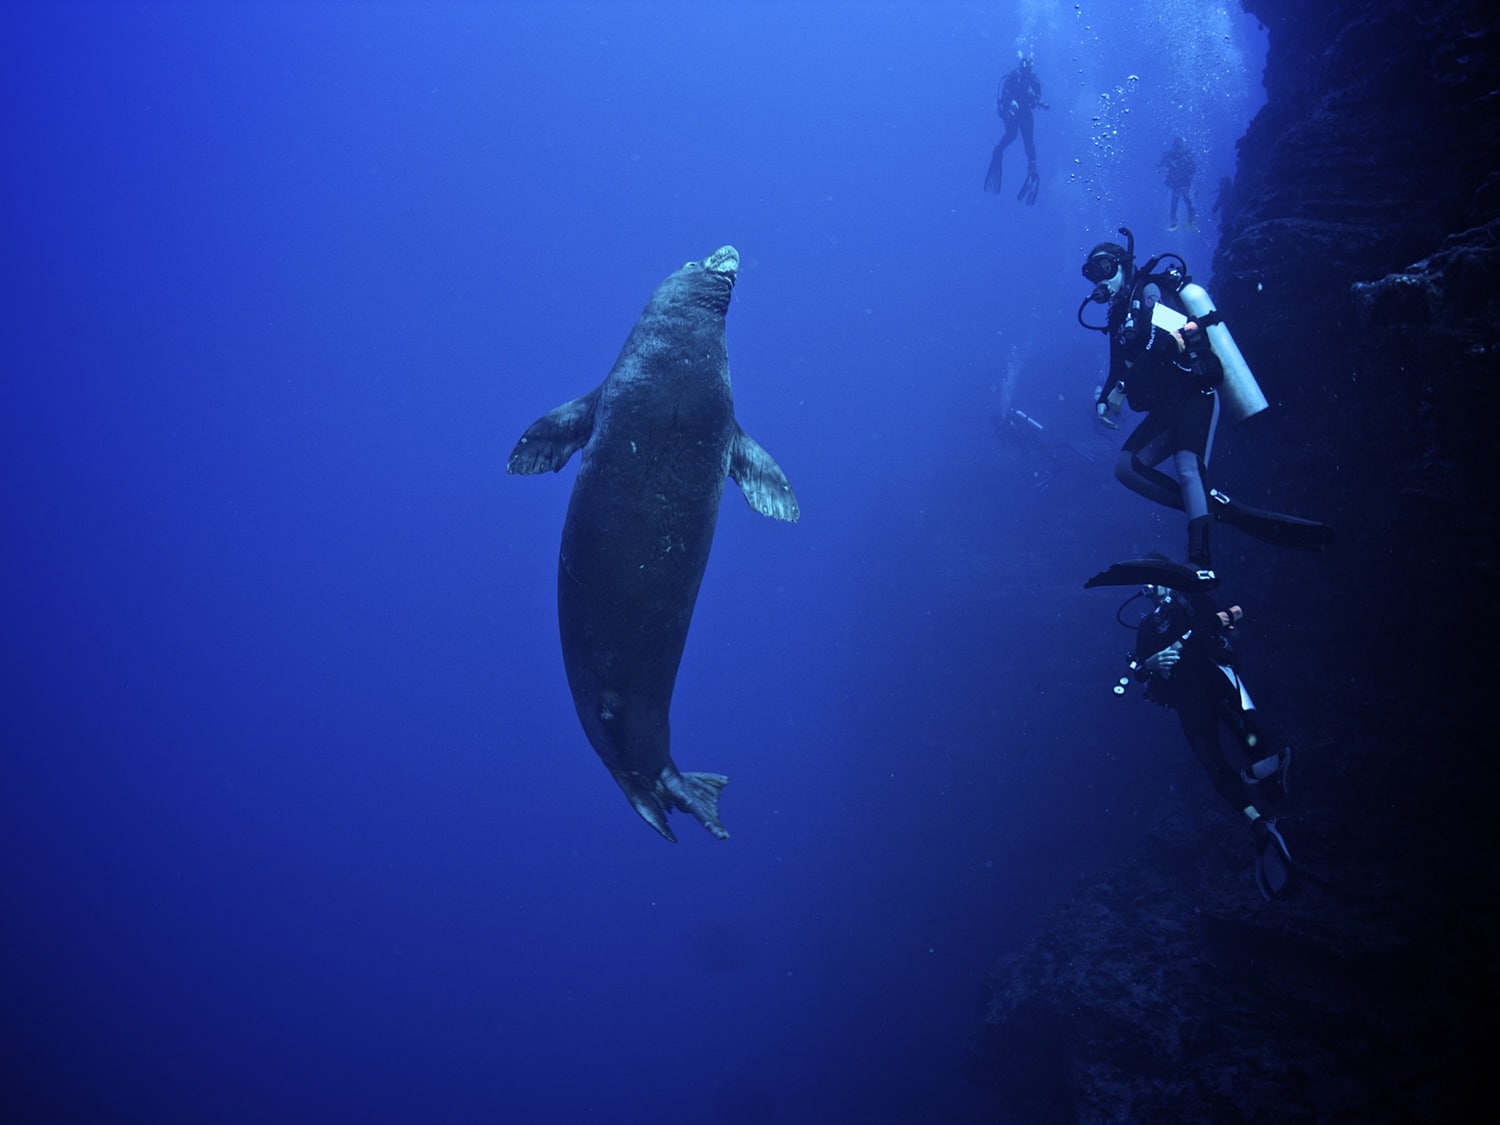 Best things to do in Kauai, Hawaii - Scuba diving with monk seals near Ni'ihua island